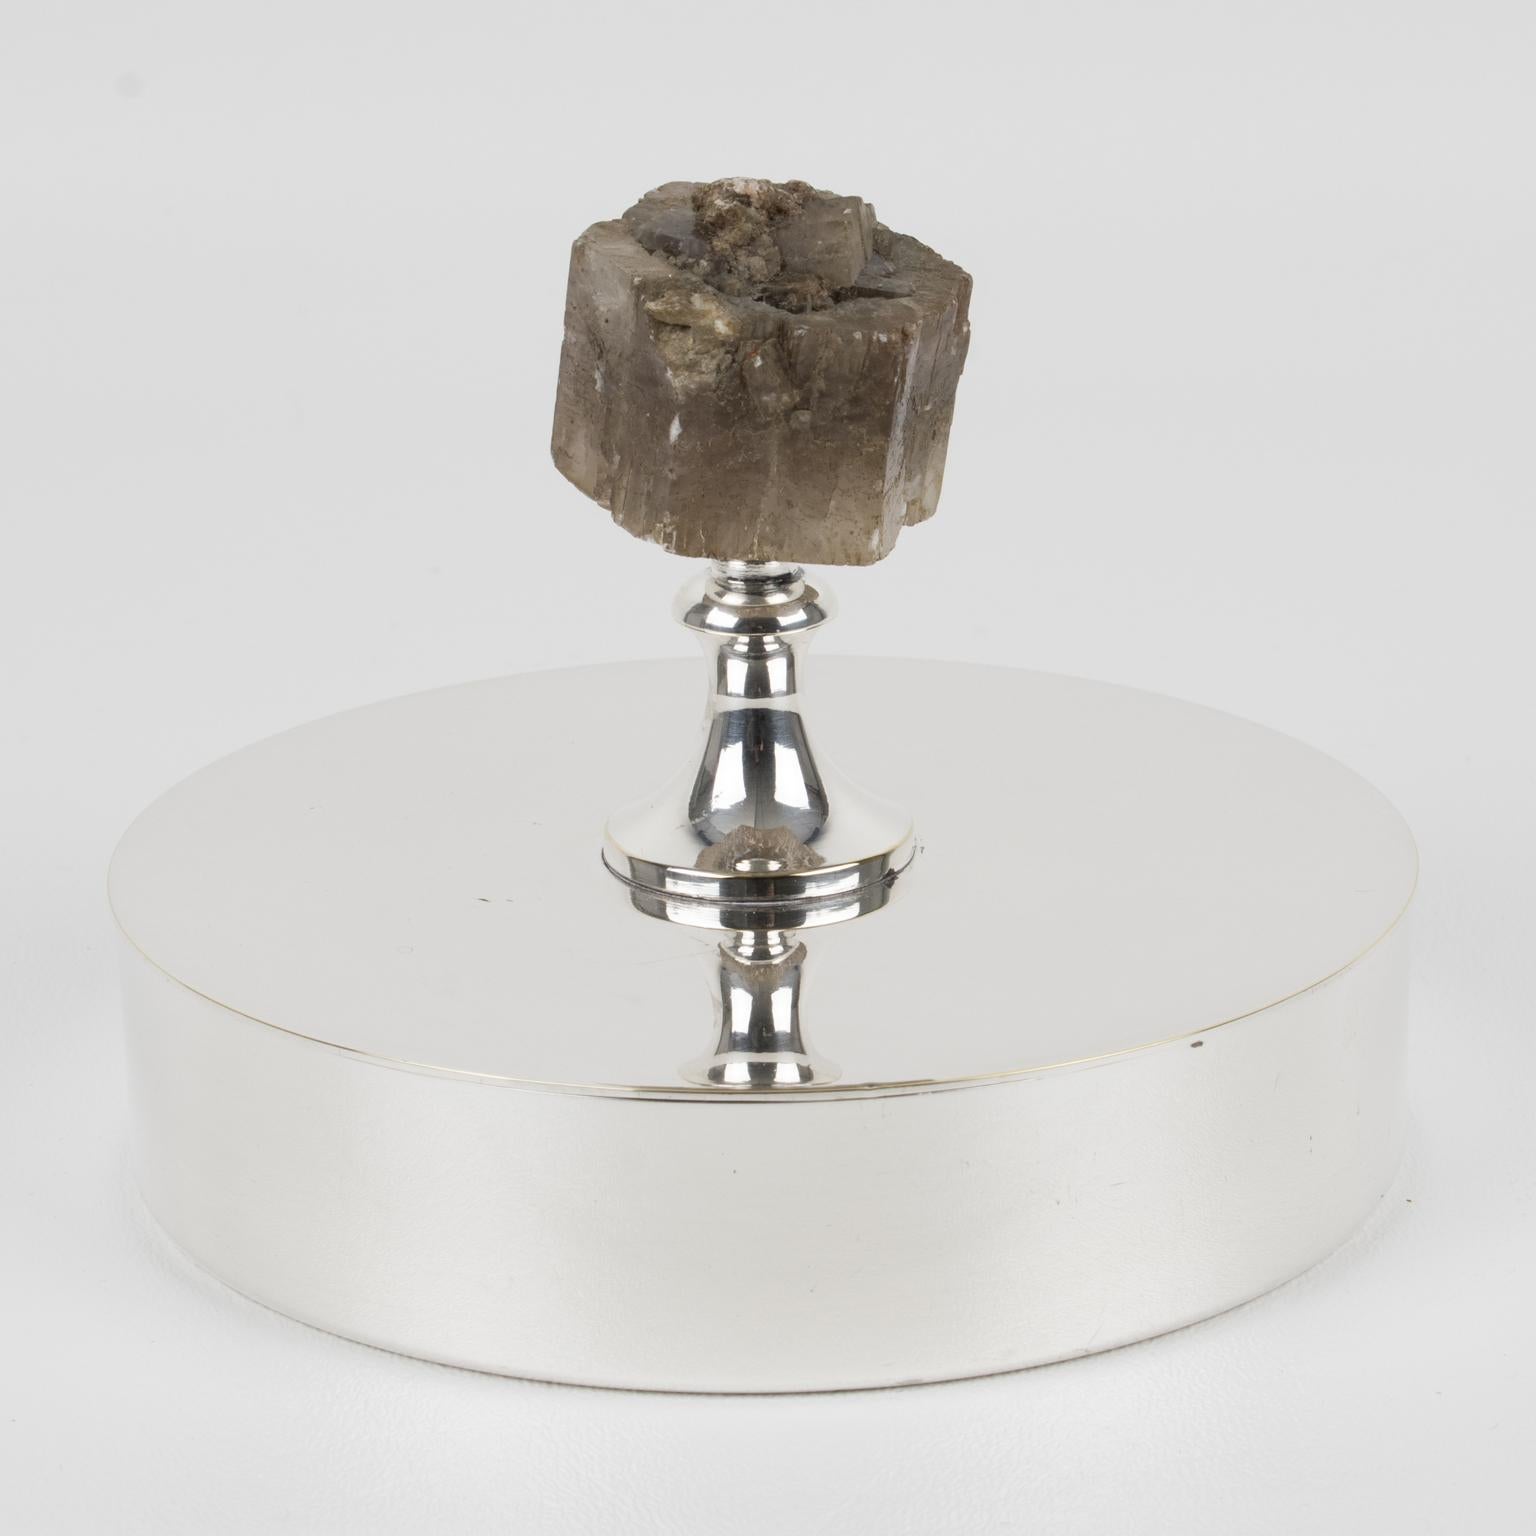 French Christian Dior Paris Silver Plate Box with Quartz Stone Finial, 1970s For Sale